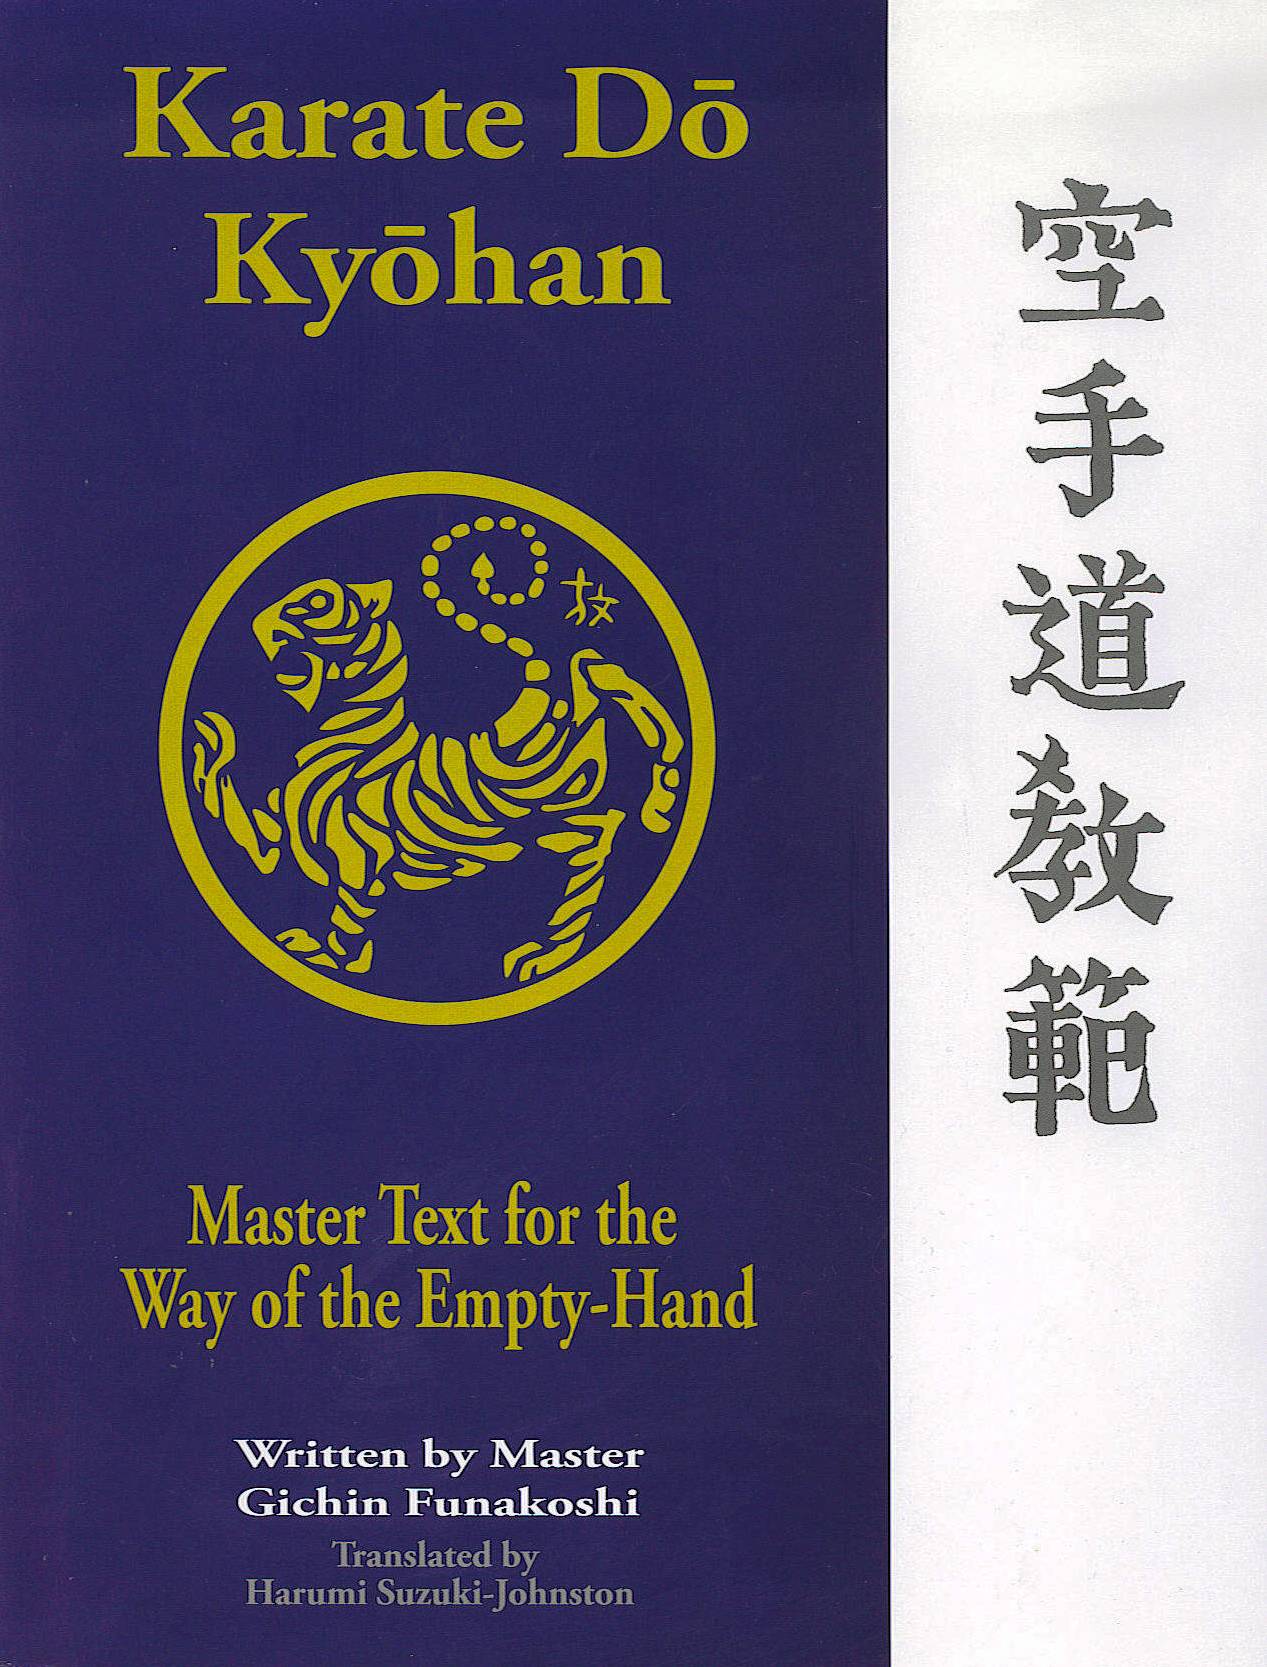 Karate-do Kyohan: Master Text for the Wayof the Empty-Hand